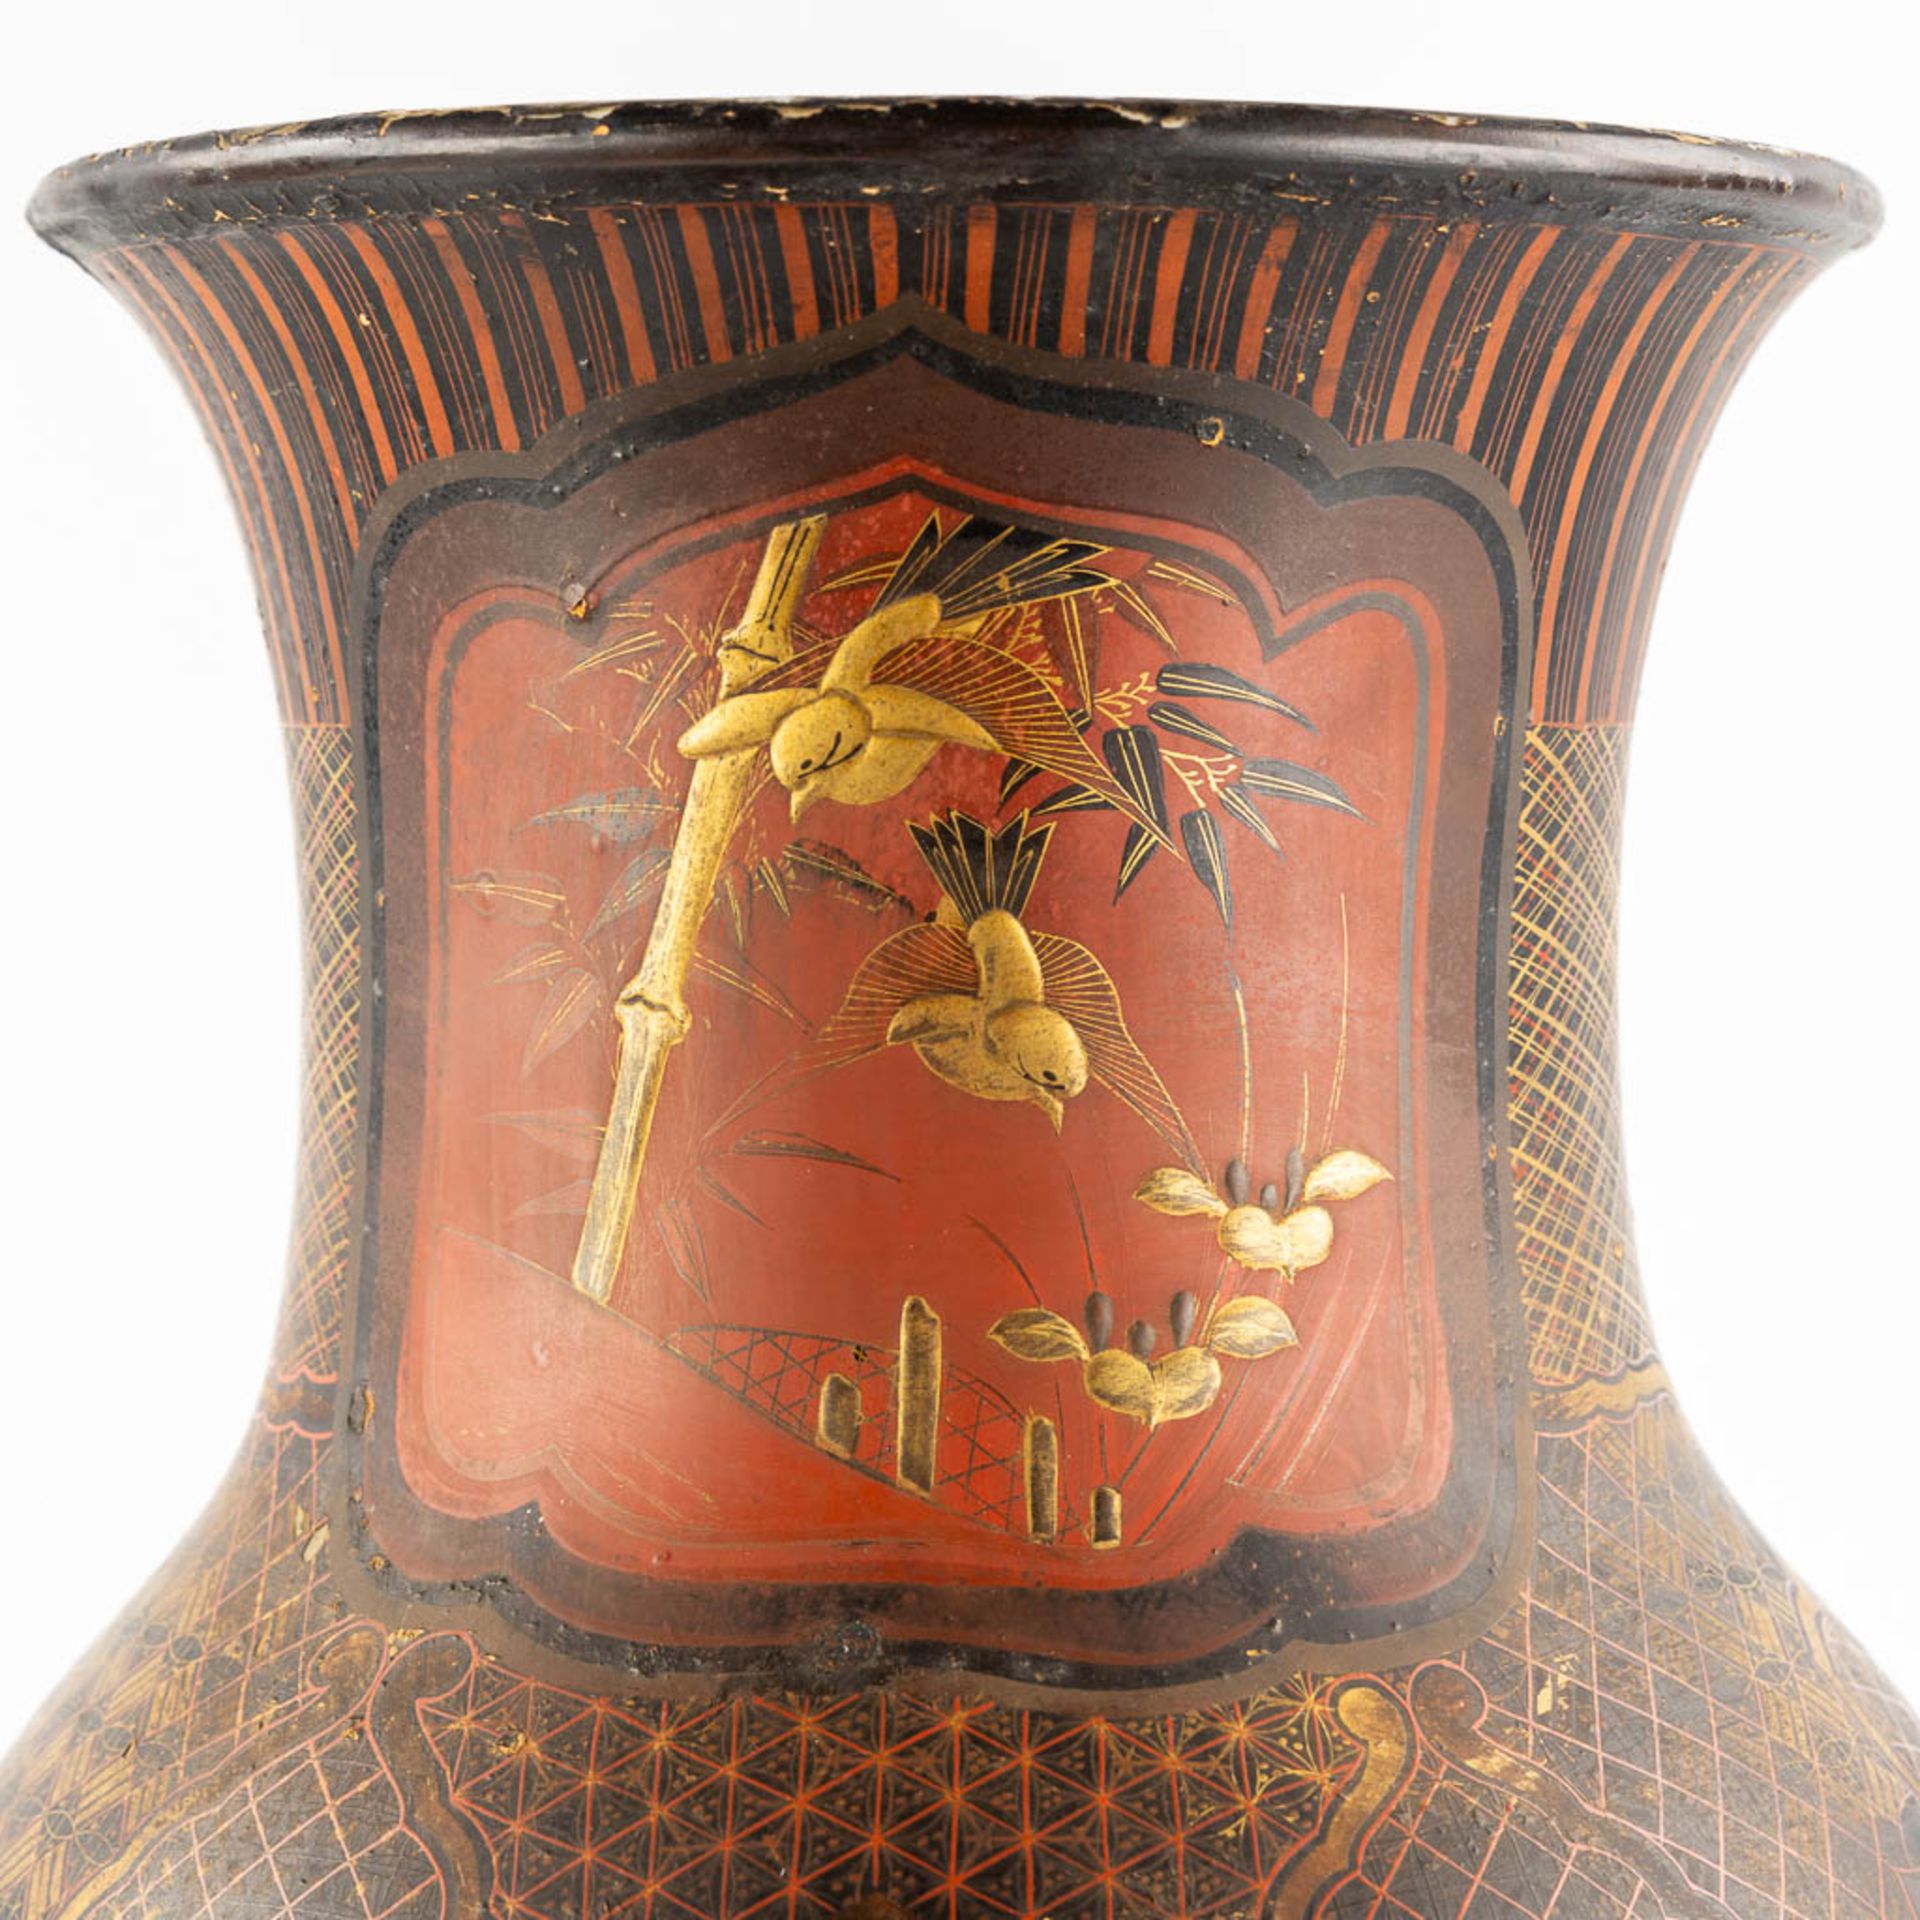 A Japanese porcelain vase, finished with red and gold lacquer. Meij period. (H:61 x D:27 cm) - Bild 10 aus 14